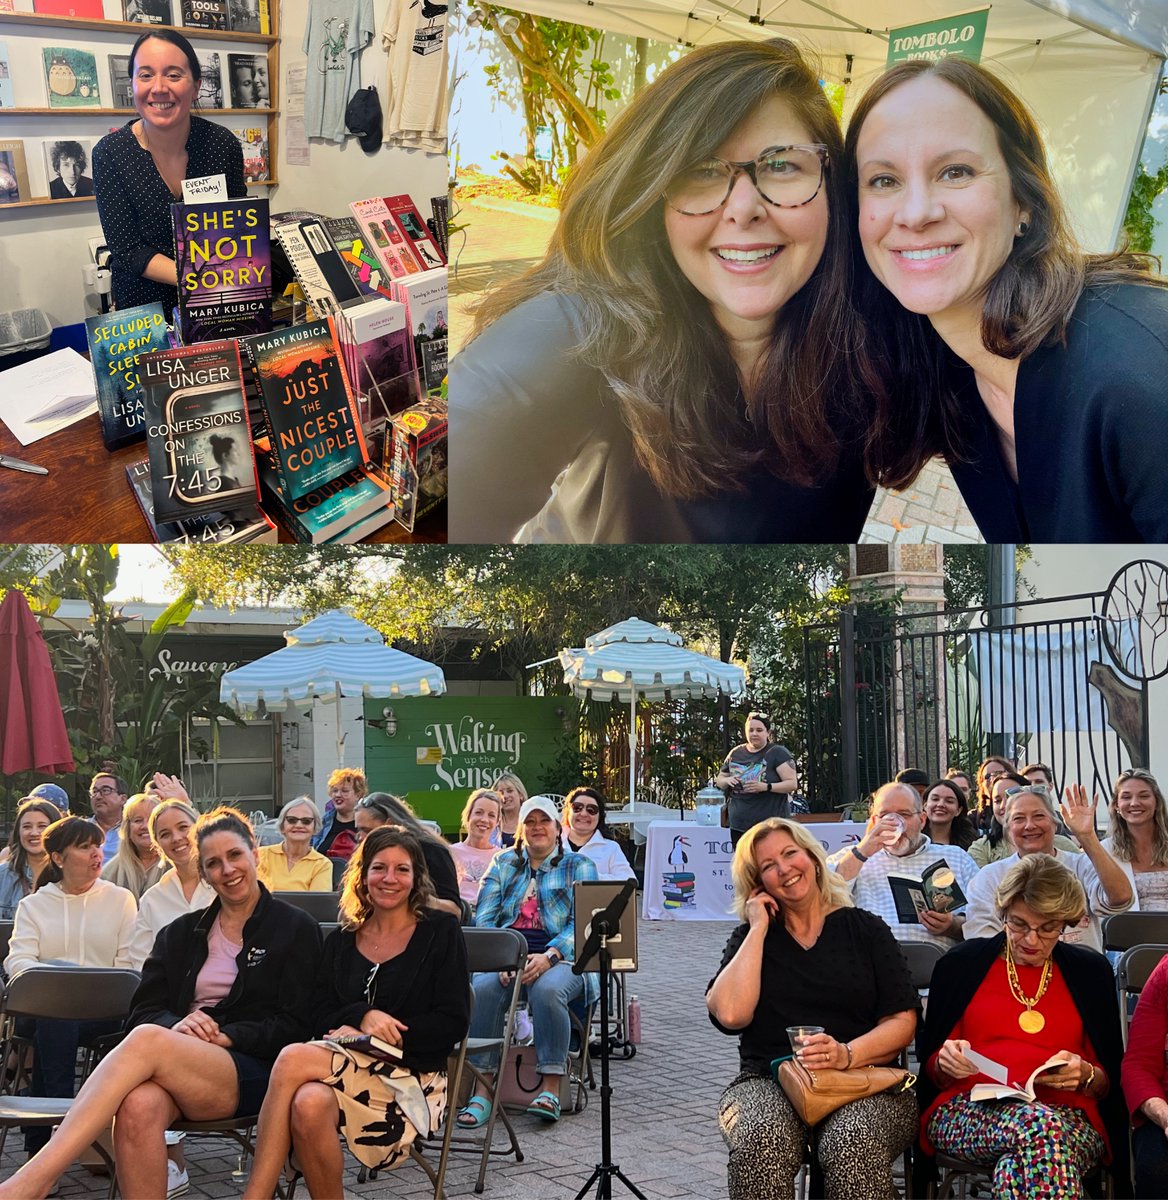 A magical evening at @tombolobooks with one of my favorite author pals, the NYT bestselling @marykubica! Perfect Florida weather, sparkling conversation, and a wonderful crowd of engaged and intelligent readers.